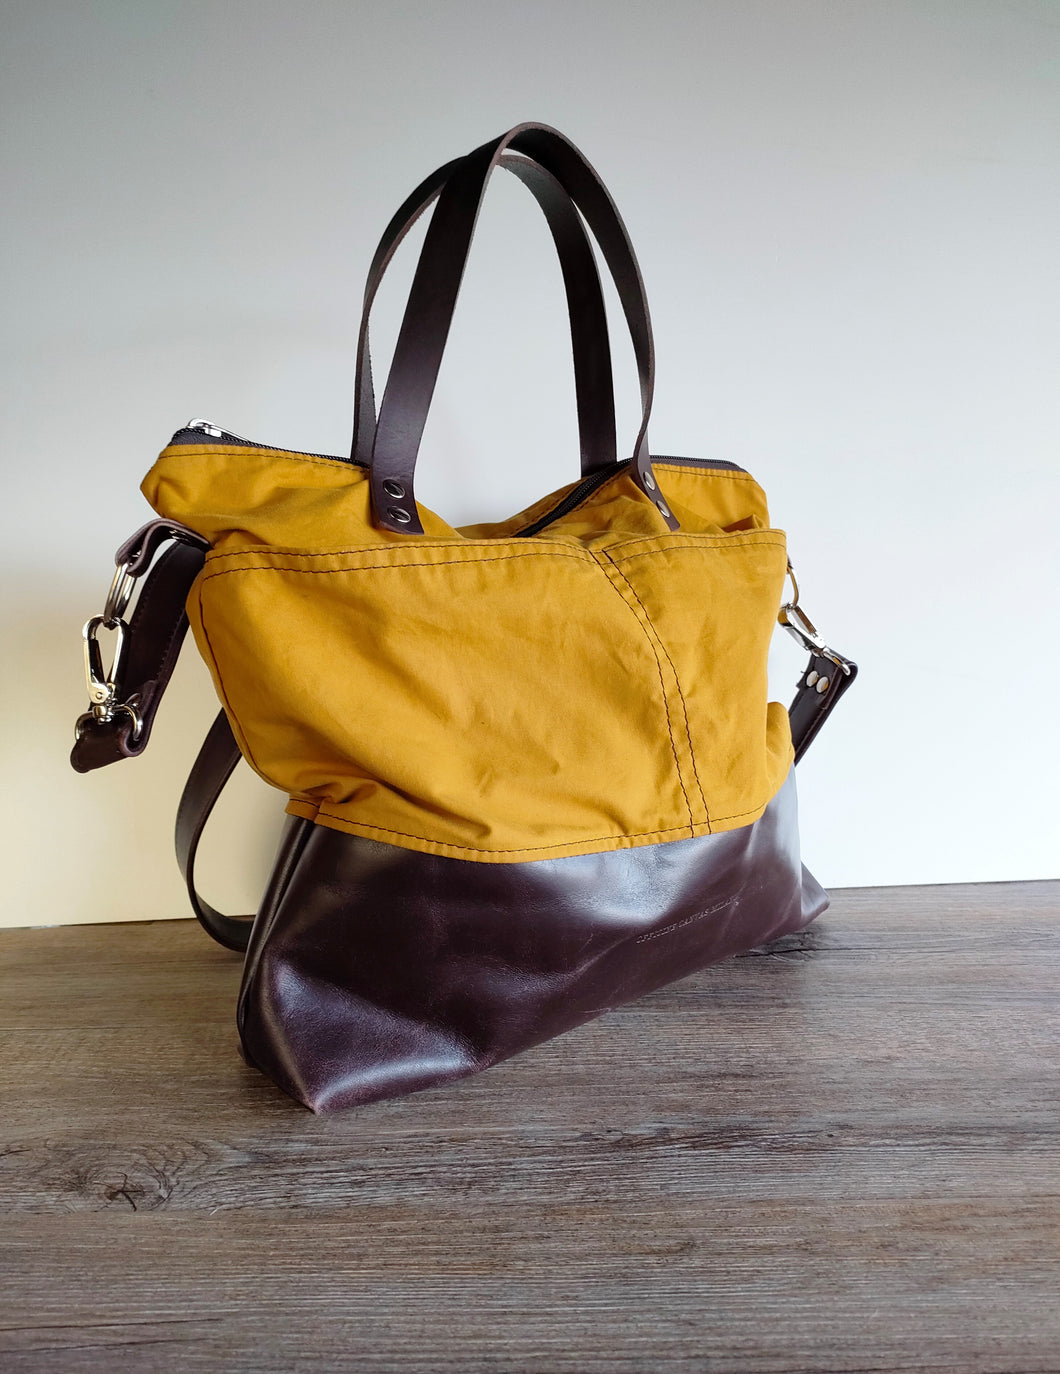 Crossbody bag in canvas and leather, satchel bag